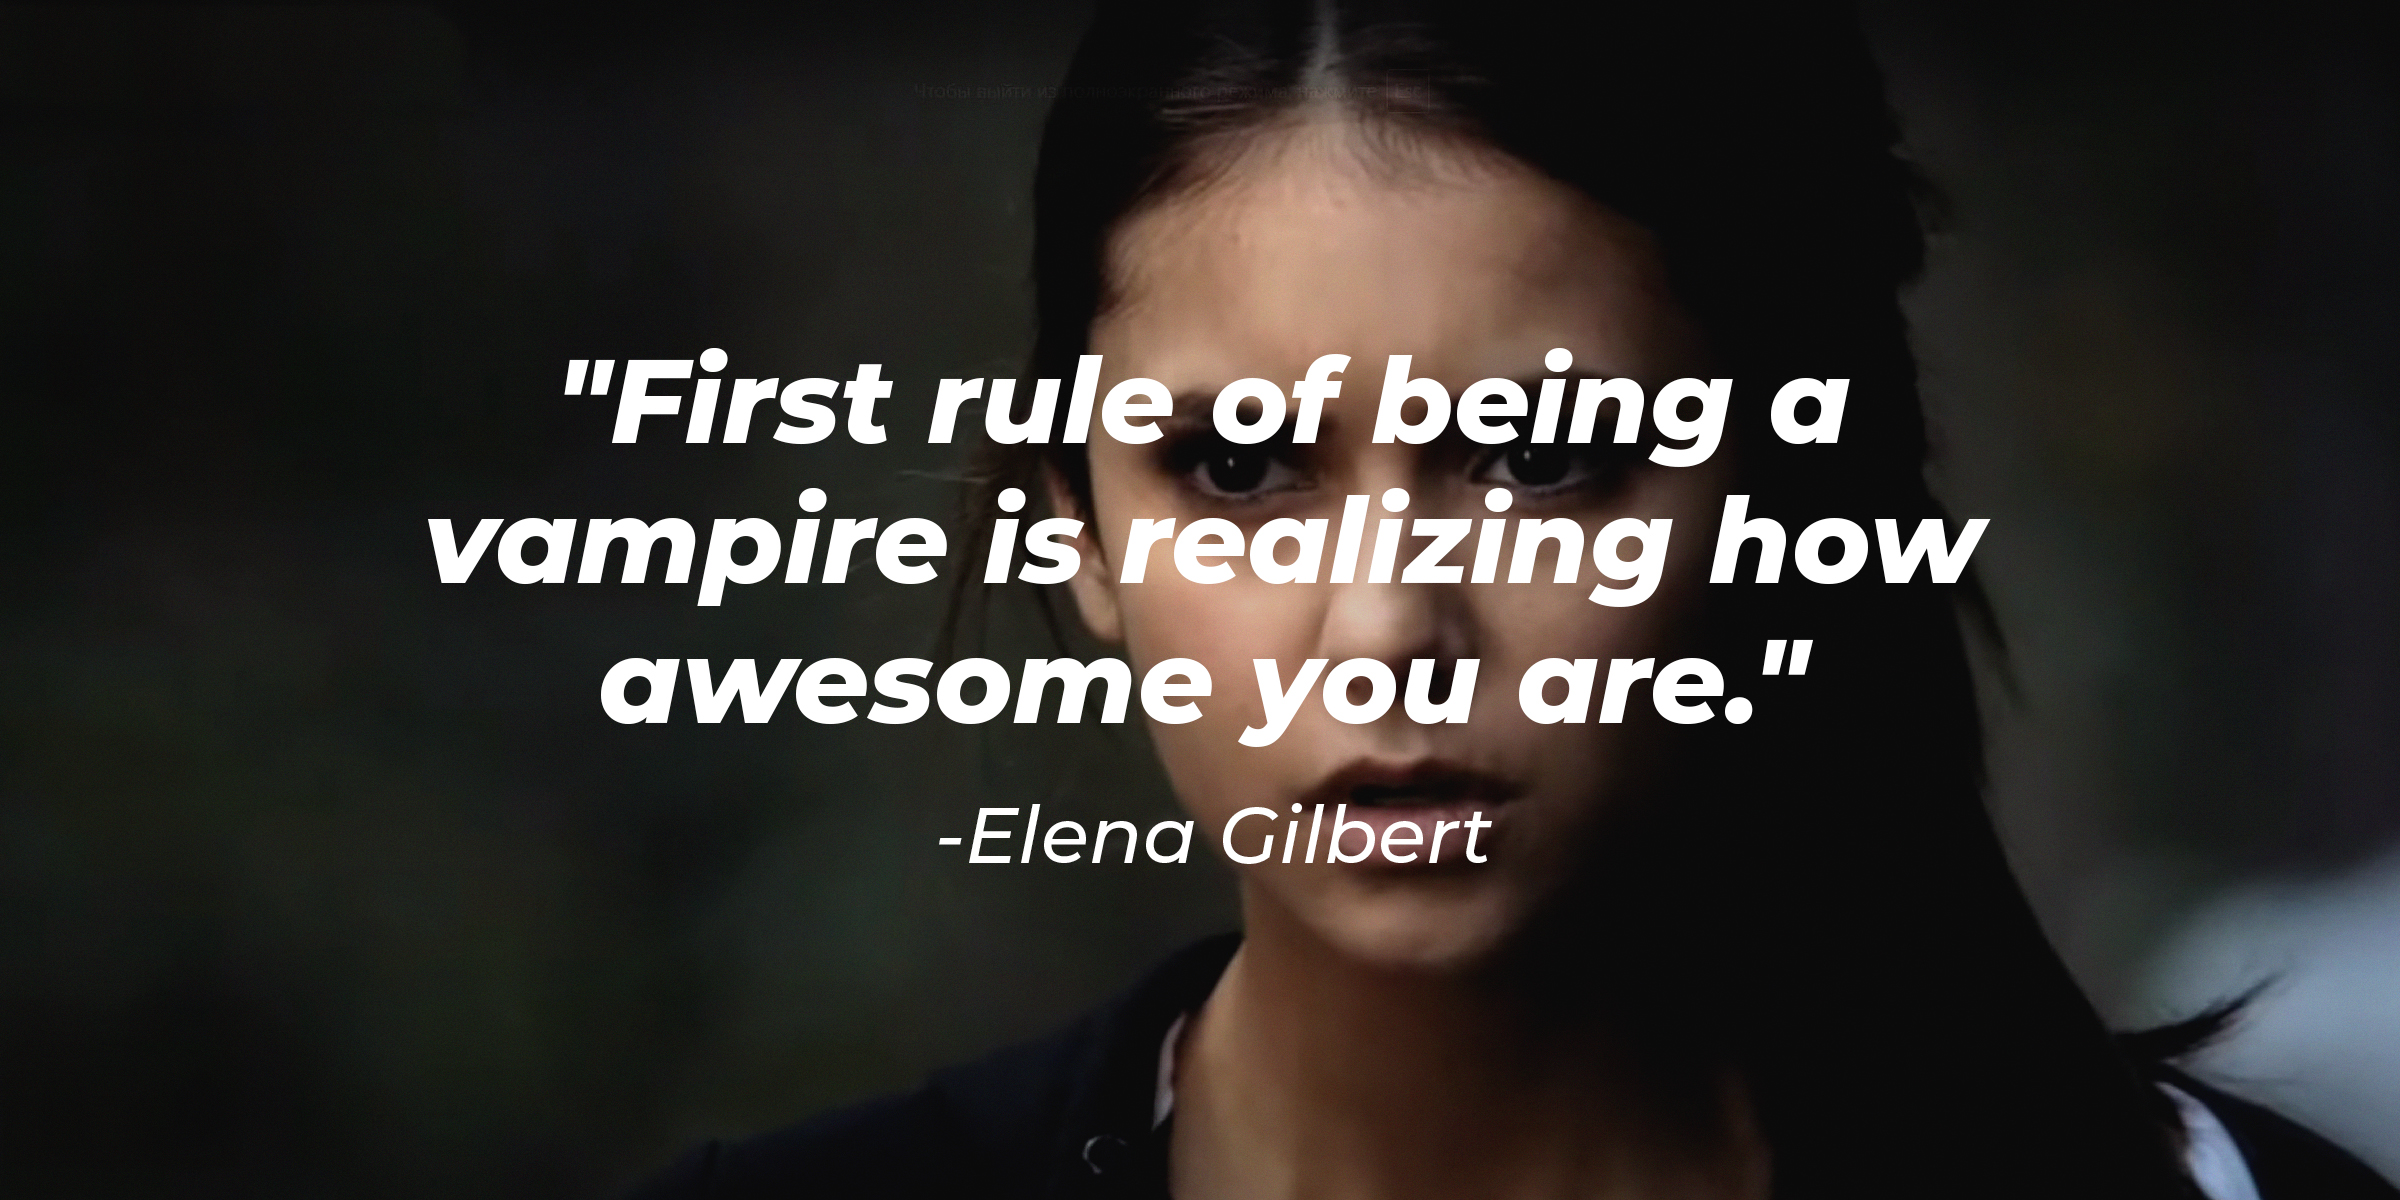 Photo of Elena Gilbert with her quote: "First rule of being a vampire is realizing how awesome you are." | Source: Facebook.com/thevampirediaries